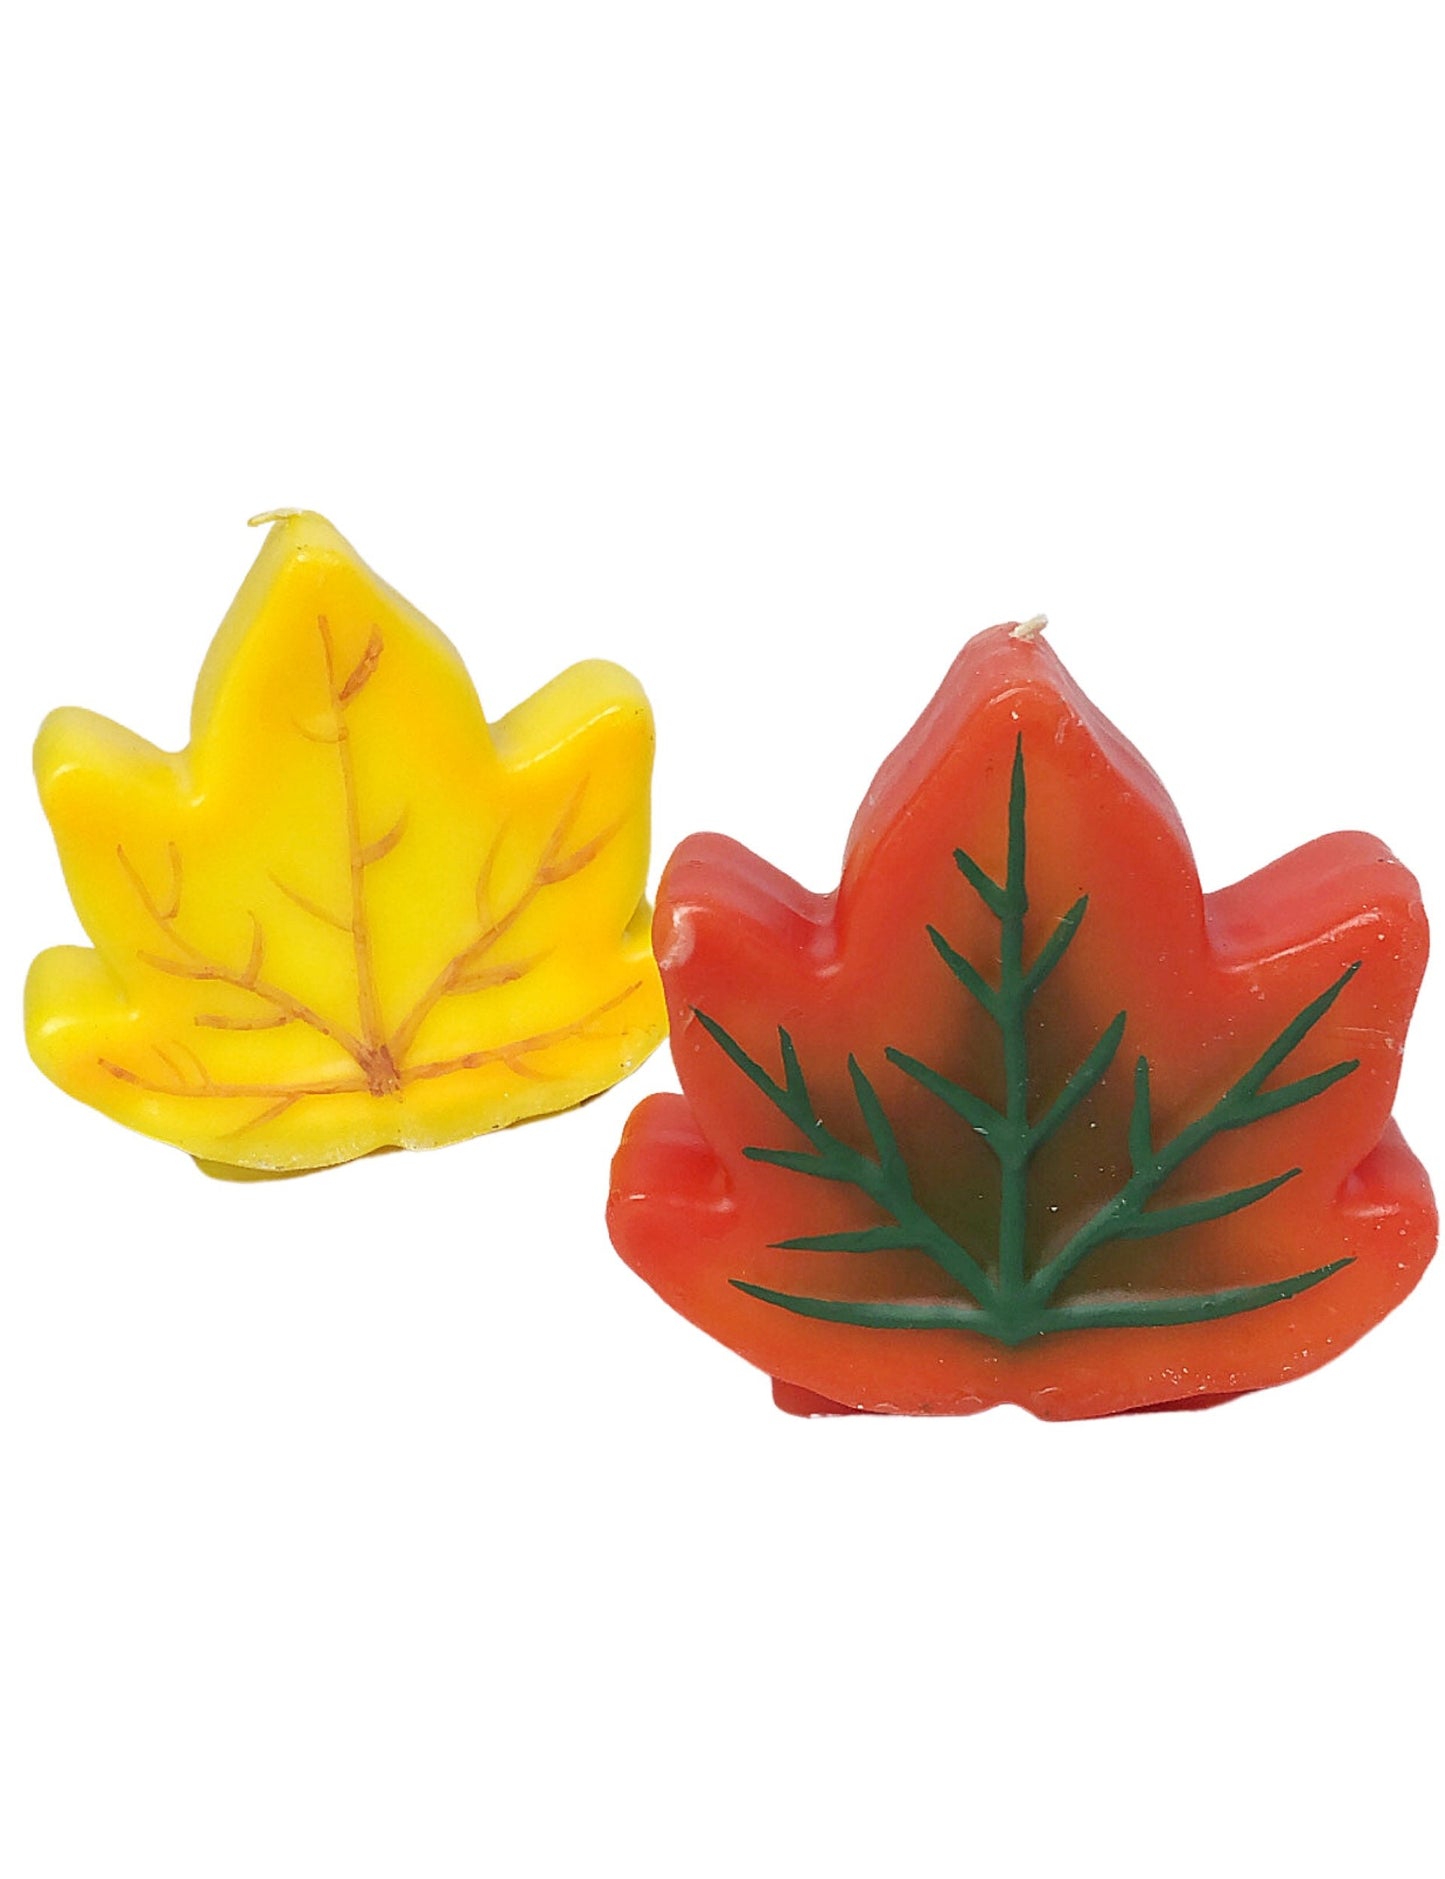 Vintage 90’s Fall Leaves Maple Leaf Shaped Candles 4” x 4”